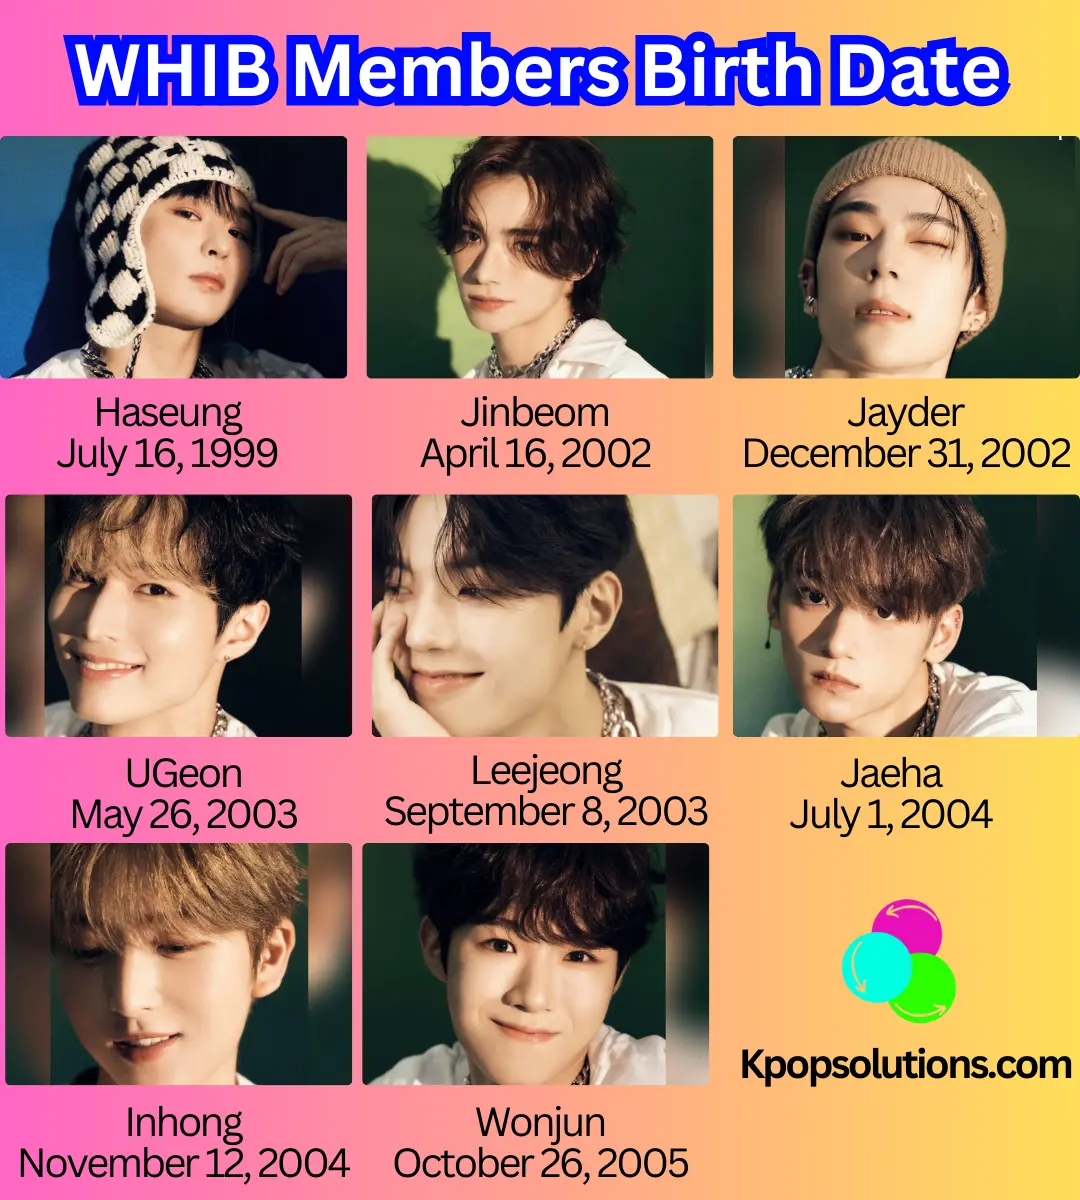 WHIB Members date of birth and current ages: Haseung, Jinbeom, Jayder, UGeon, Leejeong, Jaeha, Inhong, and Wonjun.